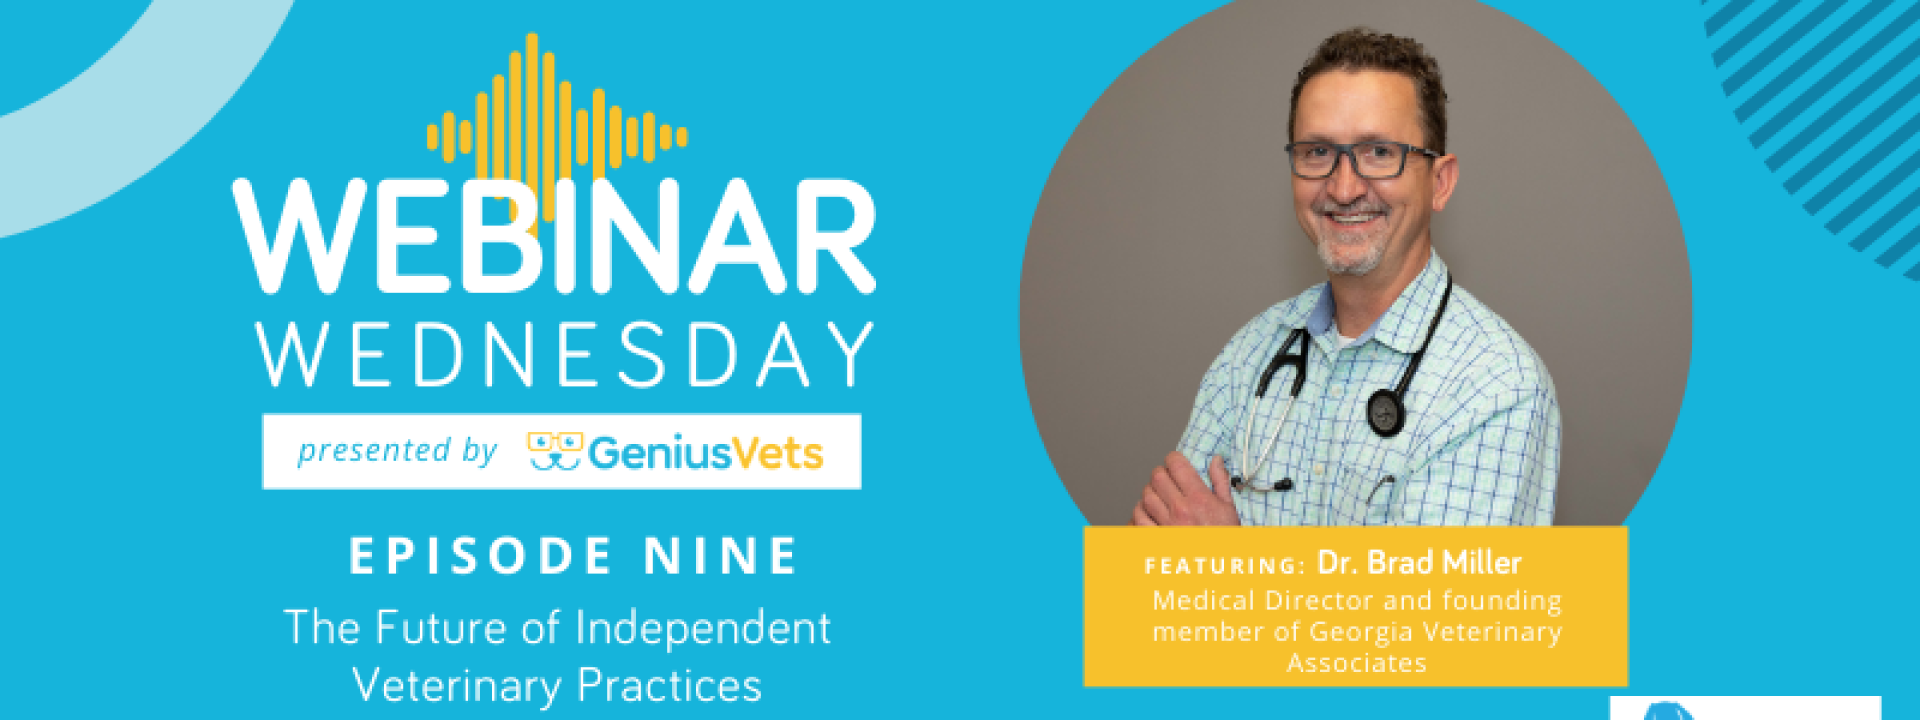 The Future of Independent Veterinary Practices With Dr. Brad Miller